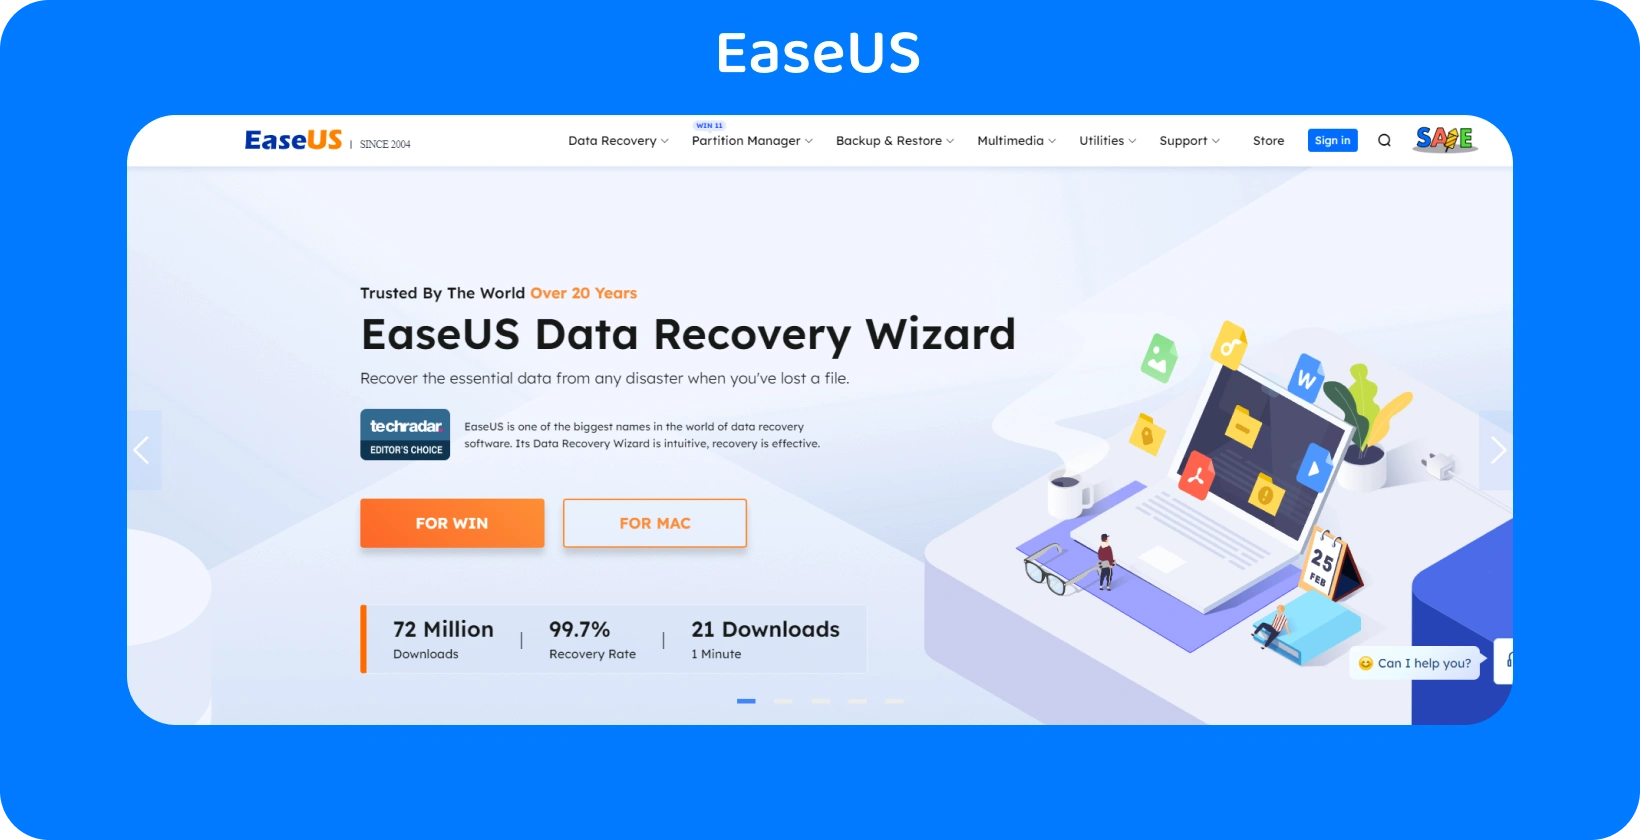 EaseUS Data Recovery Wizard's webpage, offering a reliable solution for restoring lost data with a high recovery rate.